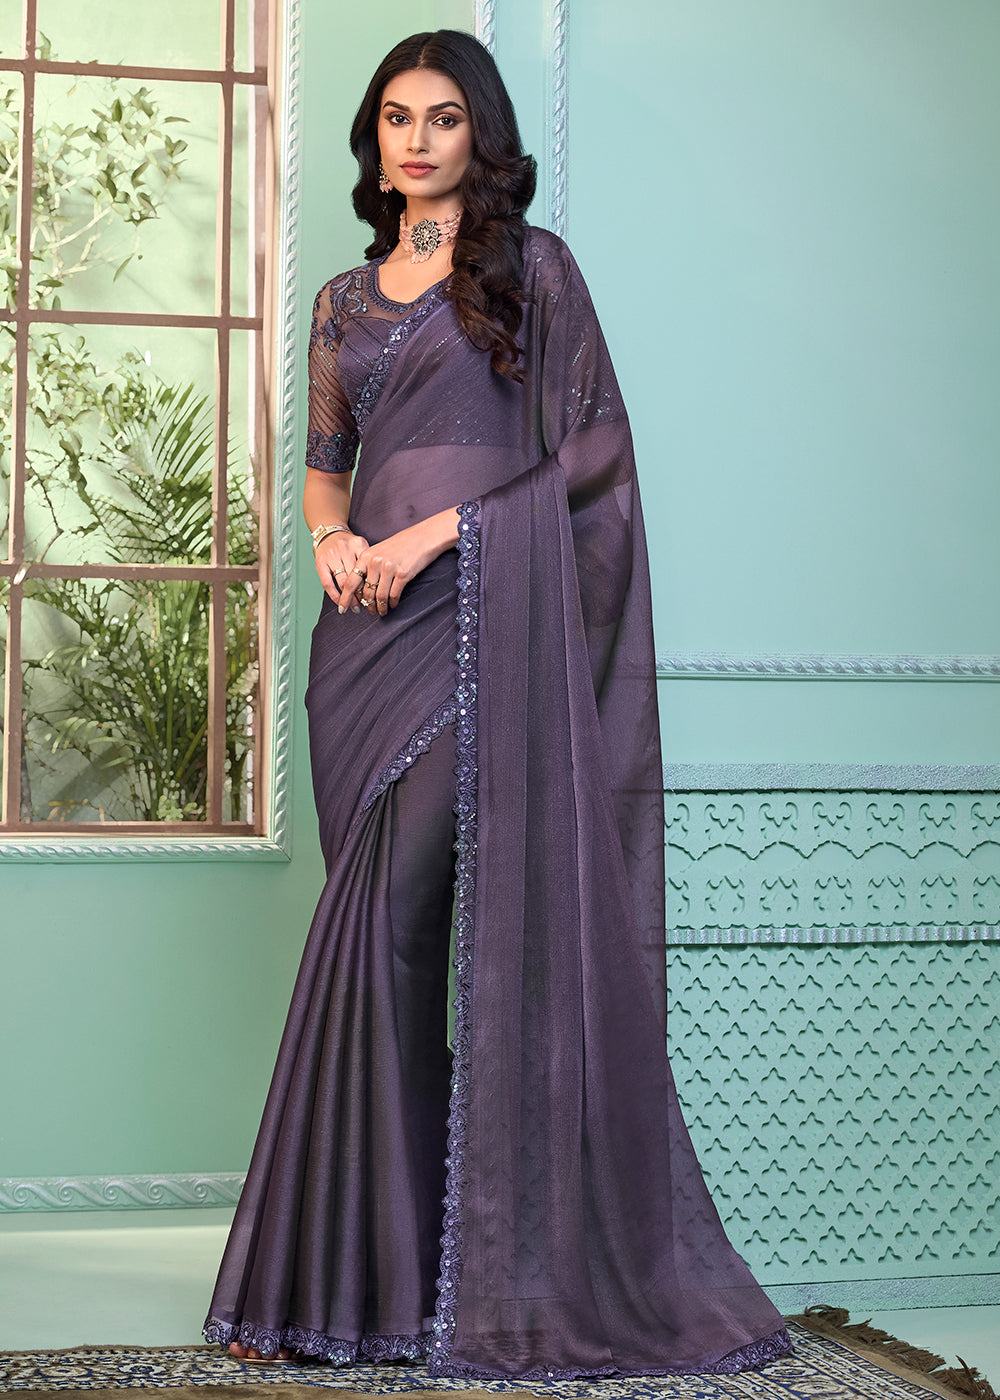 Buy Now Lovely Lavender Georgette Embroidered Wedding Party Wear Saree Online in USA, UK, Canada & Worldwide at Empress Clothing.